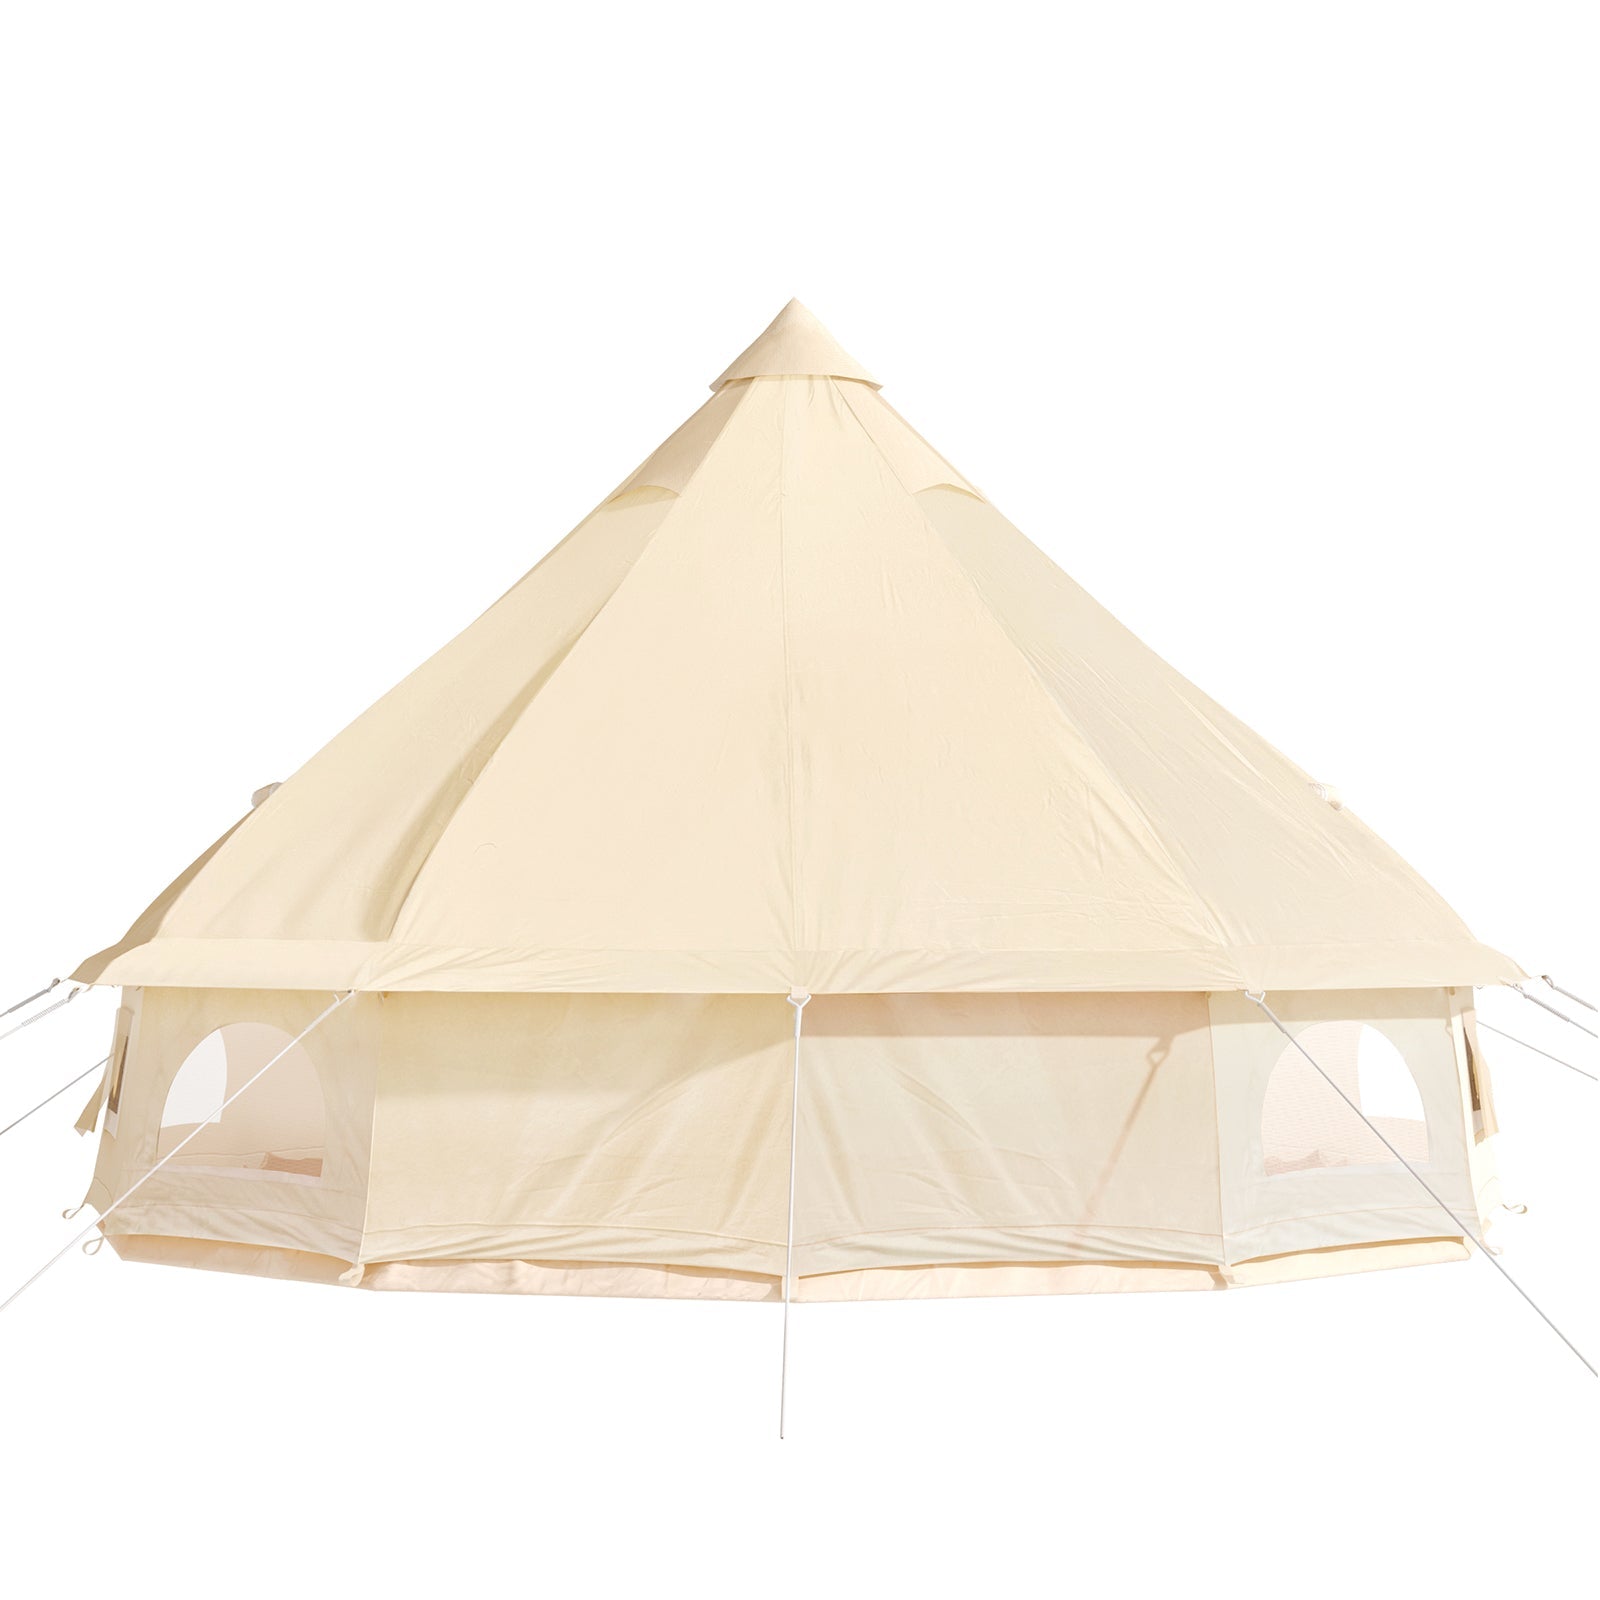 VEVORbrand Canvas Bell Tent 16.4ft Cotton Canvas Tent with Wall Stove Jacket Glamping Tent Waterproof Bell Tent for Family Camping Outdoor Hunting in 4 Seasons